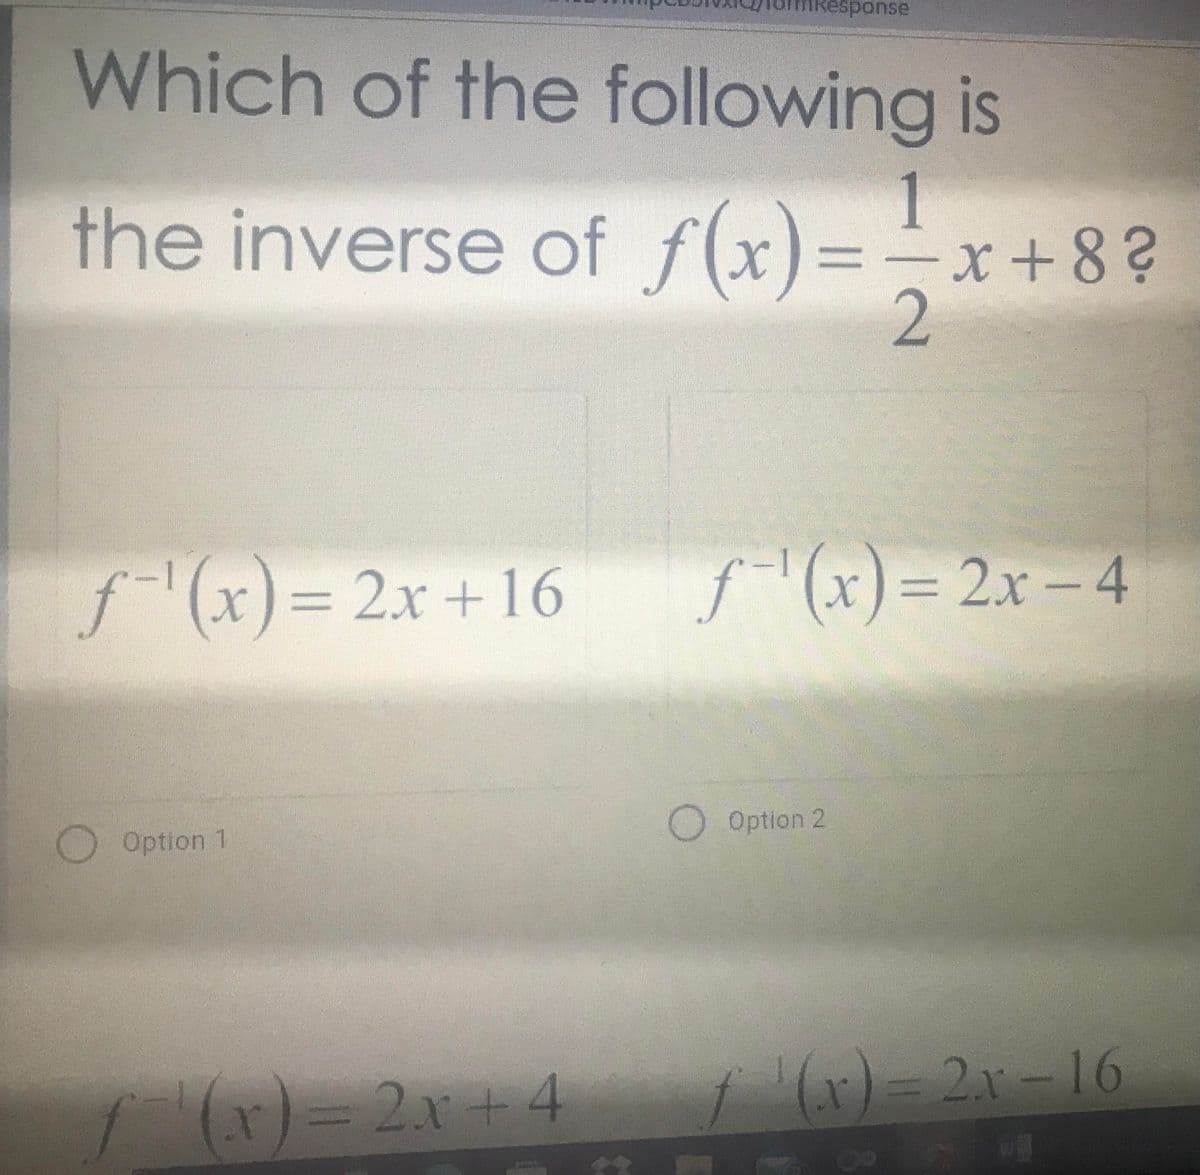 Response
Which of the following is
the inverse of f(x)=-x+8?
%3D
f(x)=
2x +16
f(x)%3D2X-4
%3D
Option 2
Option 1
(r)= 2x+4
(x)= 2x-16
